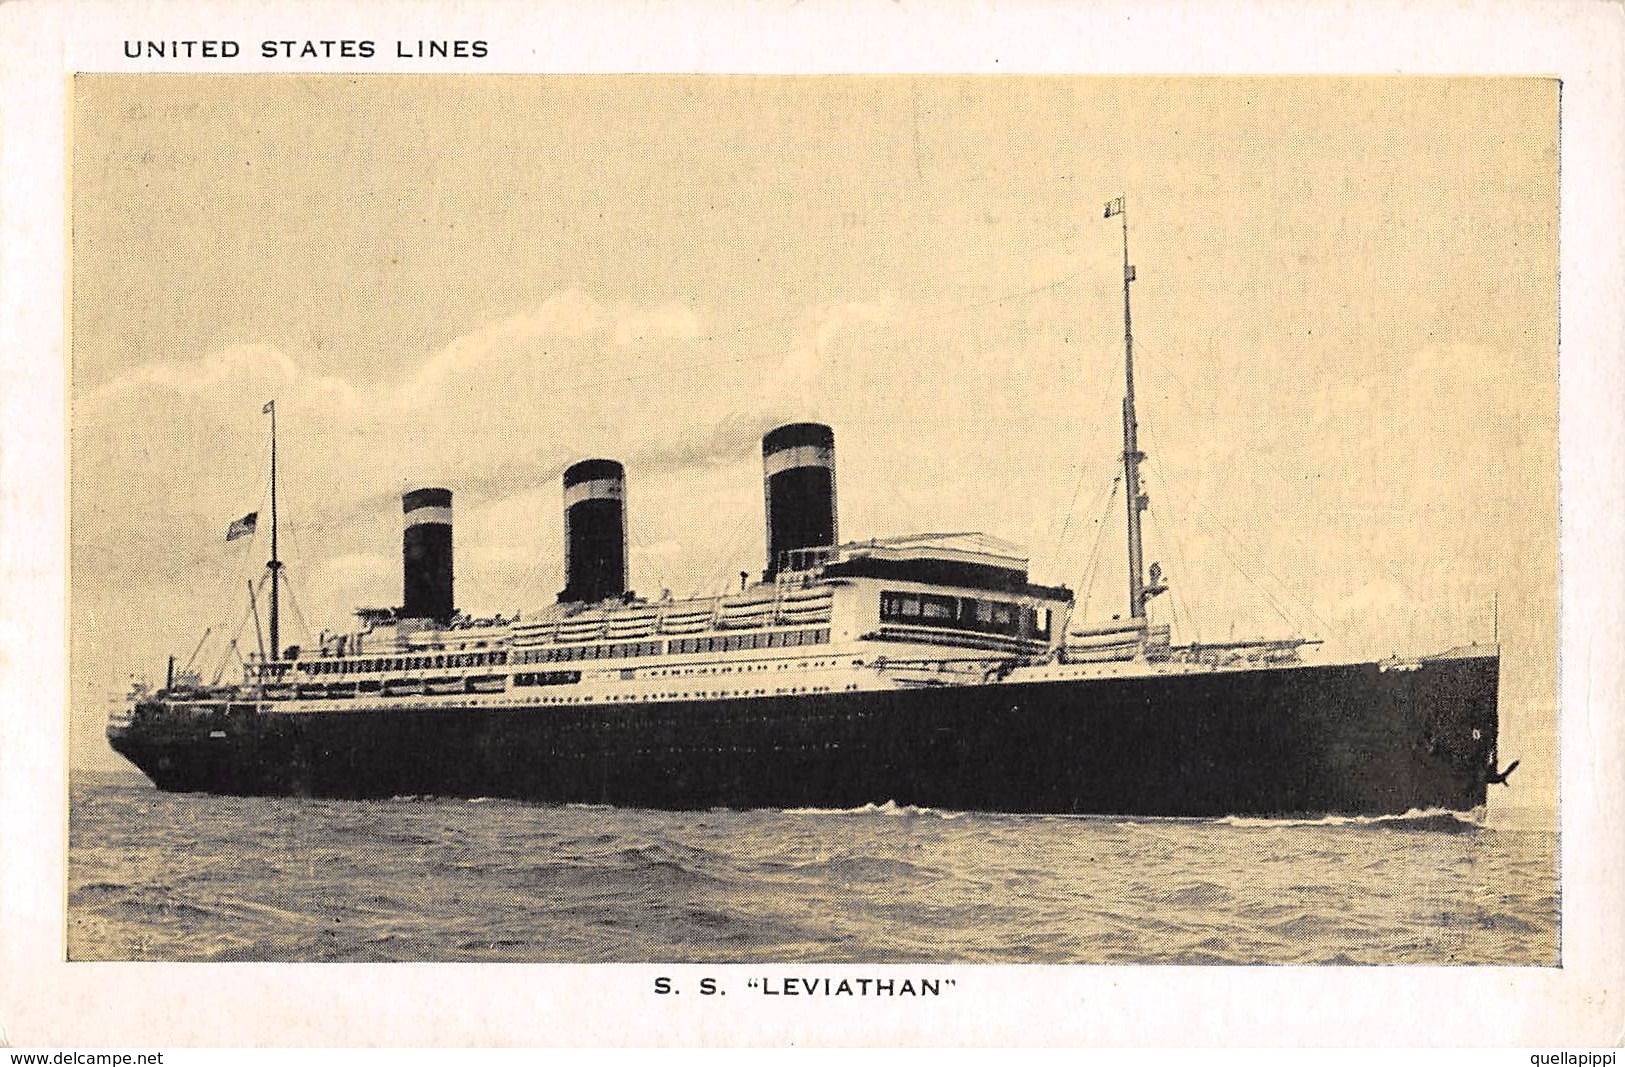 05826 "TRANSATLANTICO S.S. LEVIATHAN - 65640 TONS - INITED STATES LINES" CART SPED - Banche